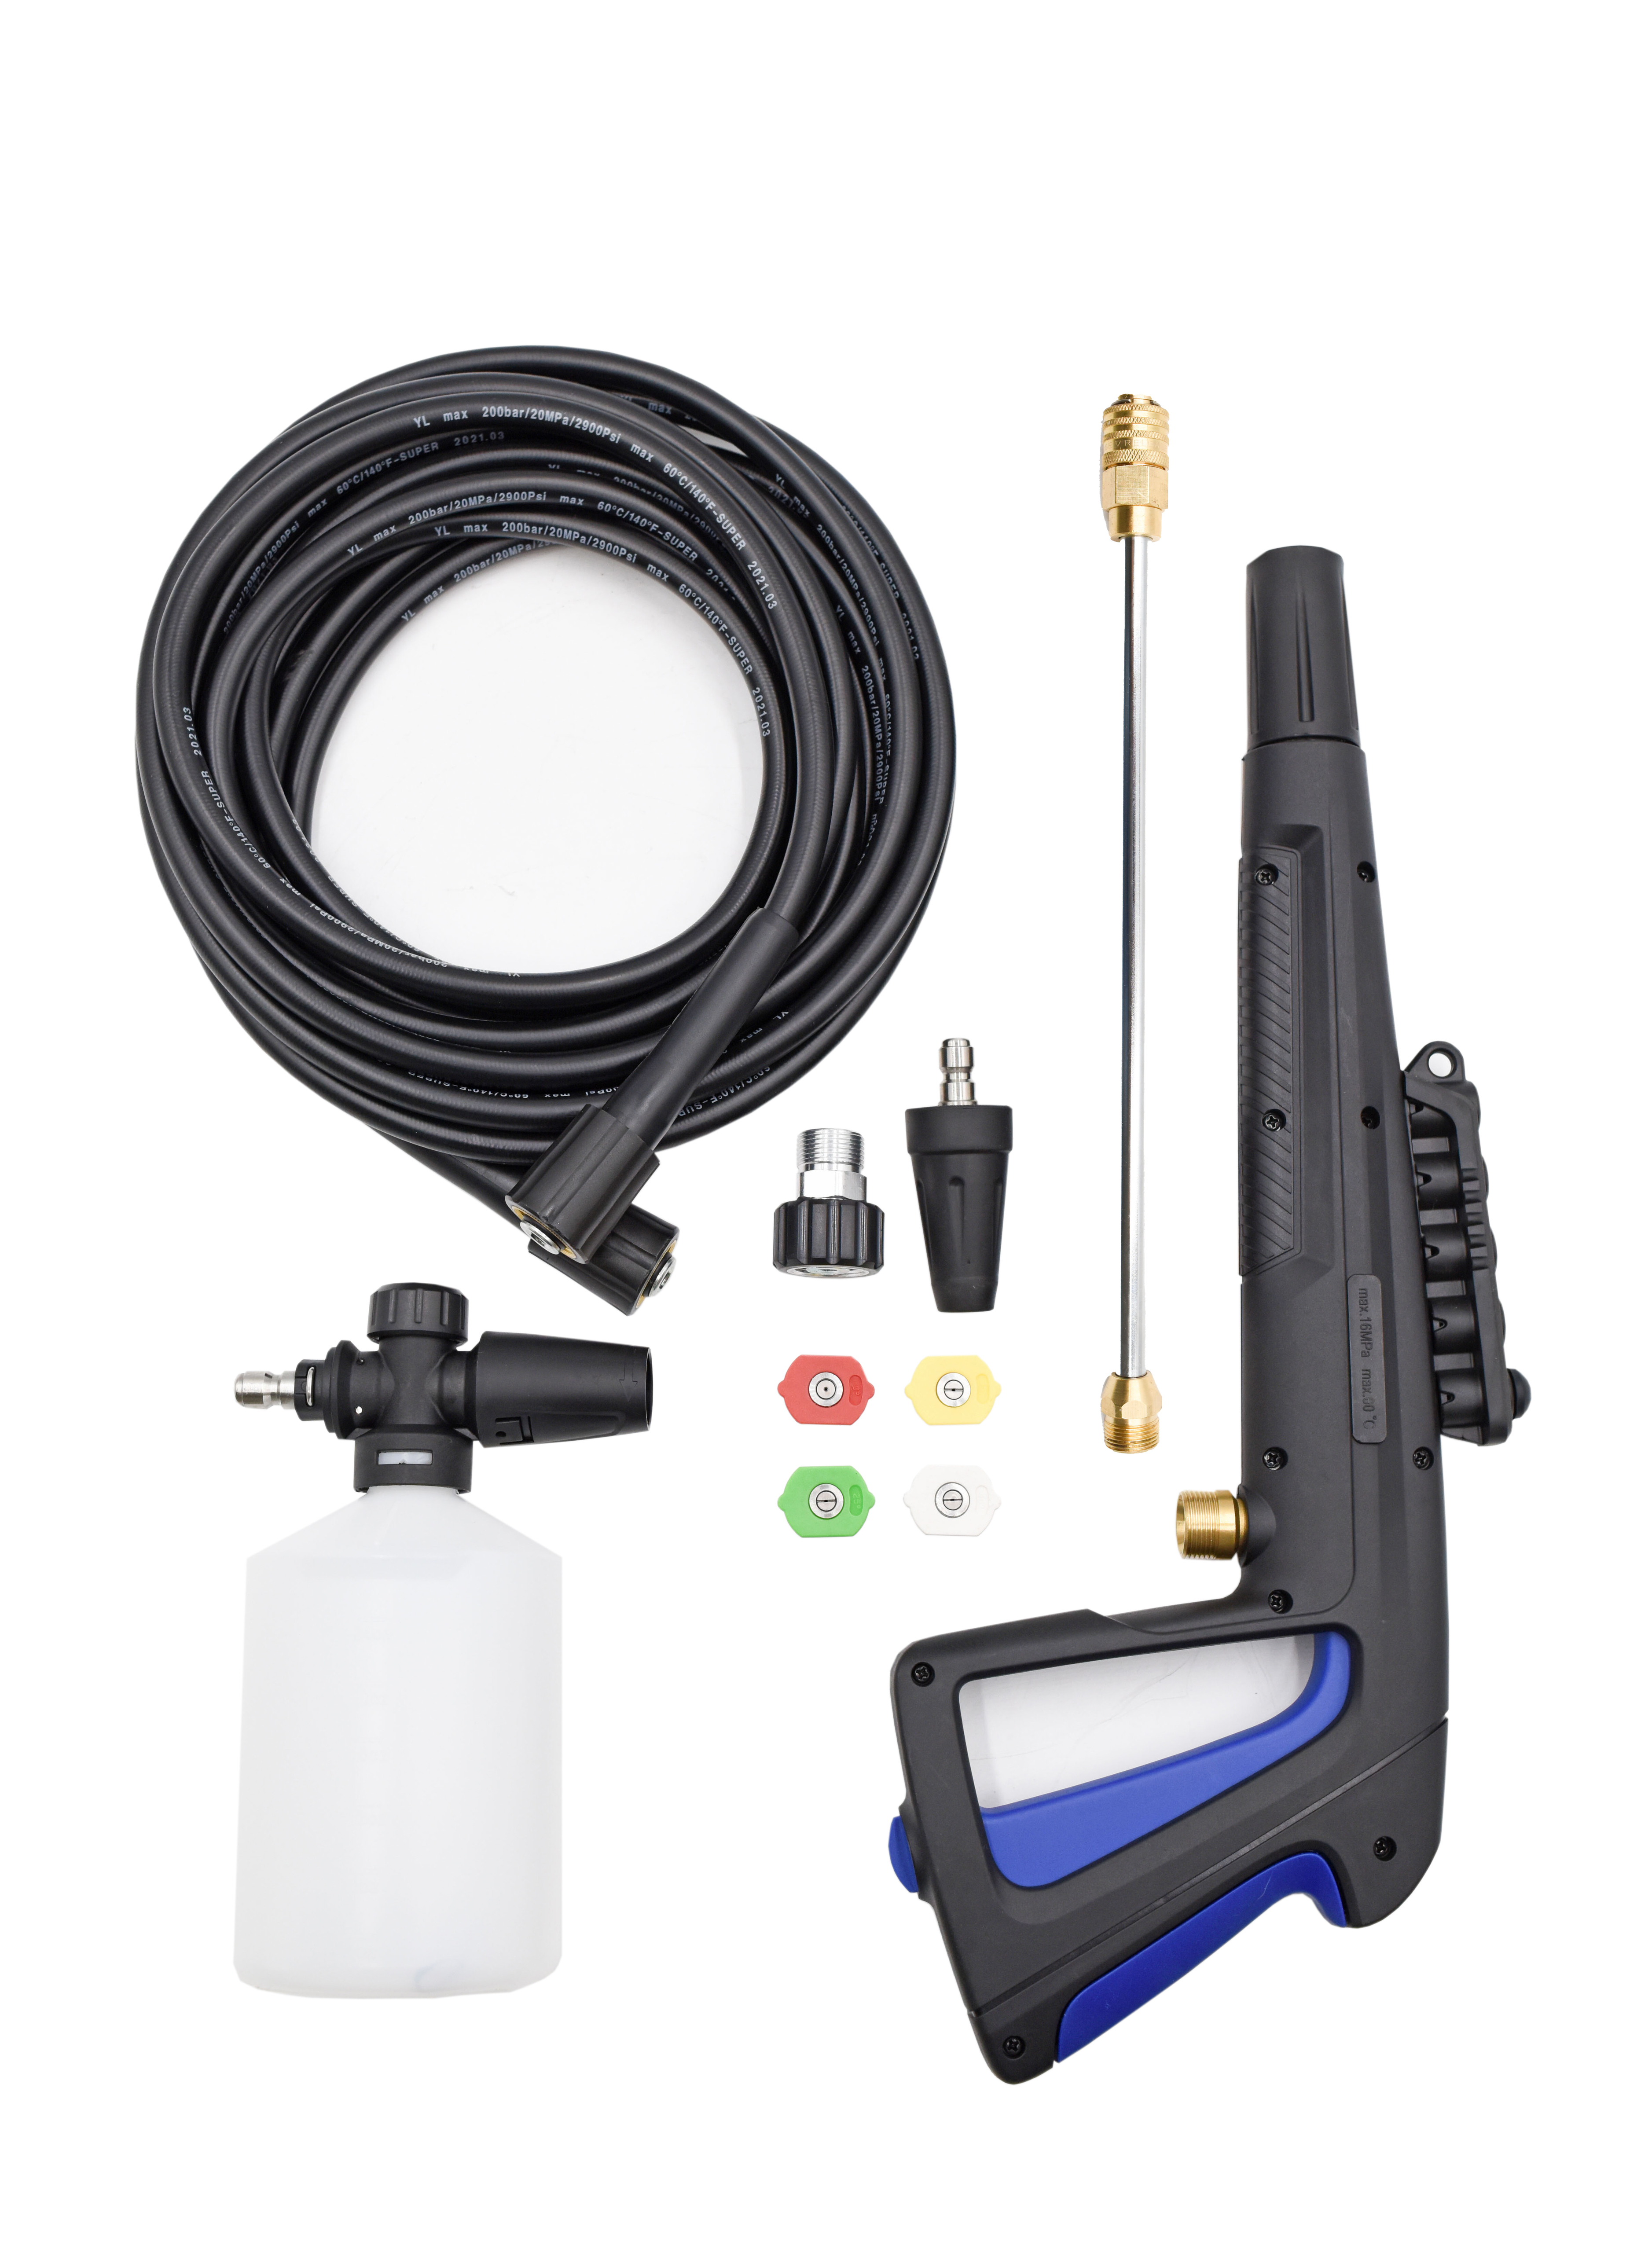 Will this work with my AR blue clean 111s pressure washer?